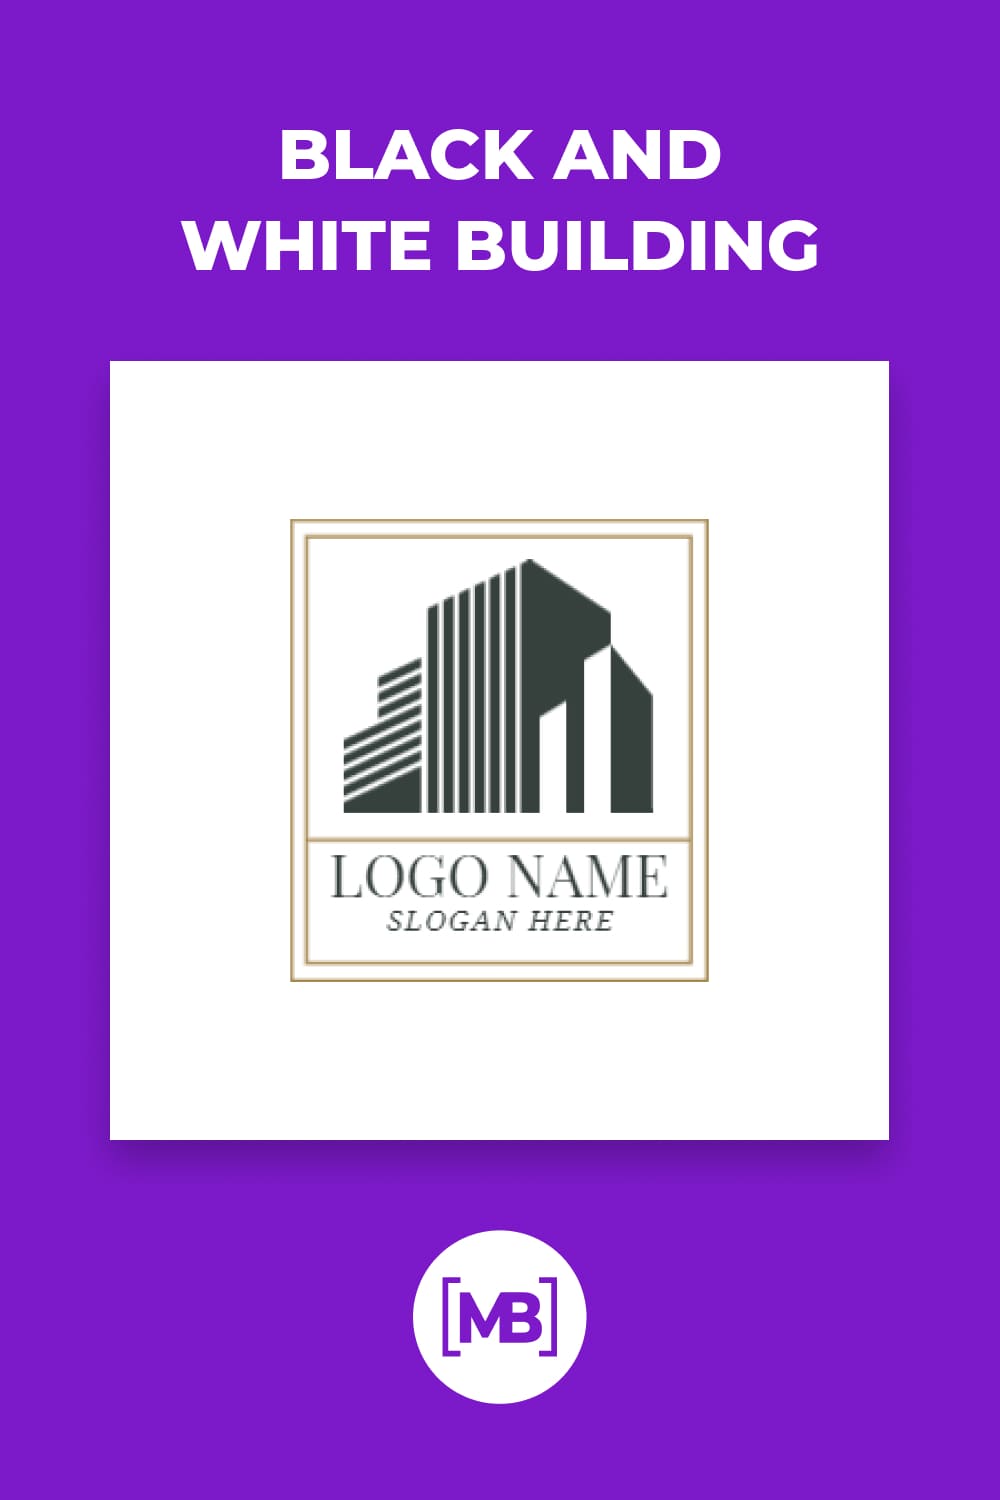 An excellent constructor for a logo.